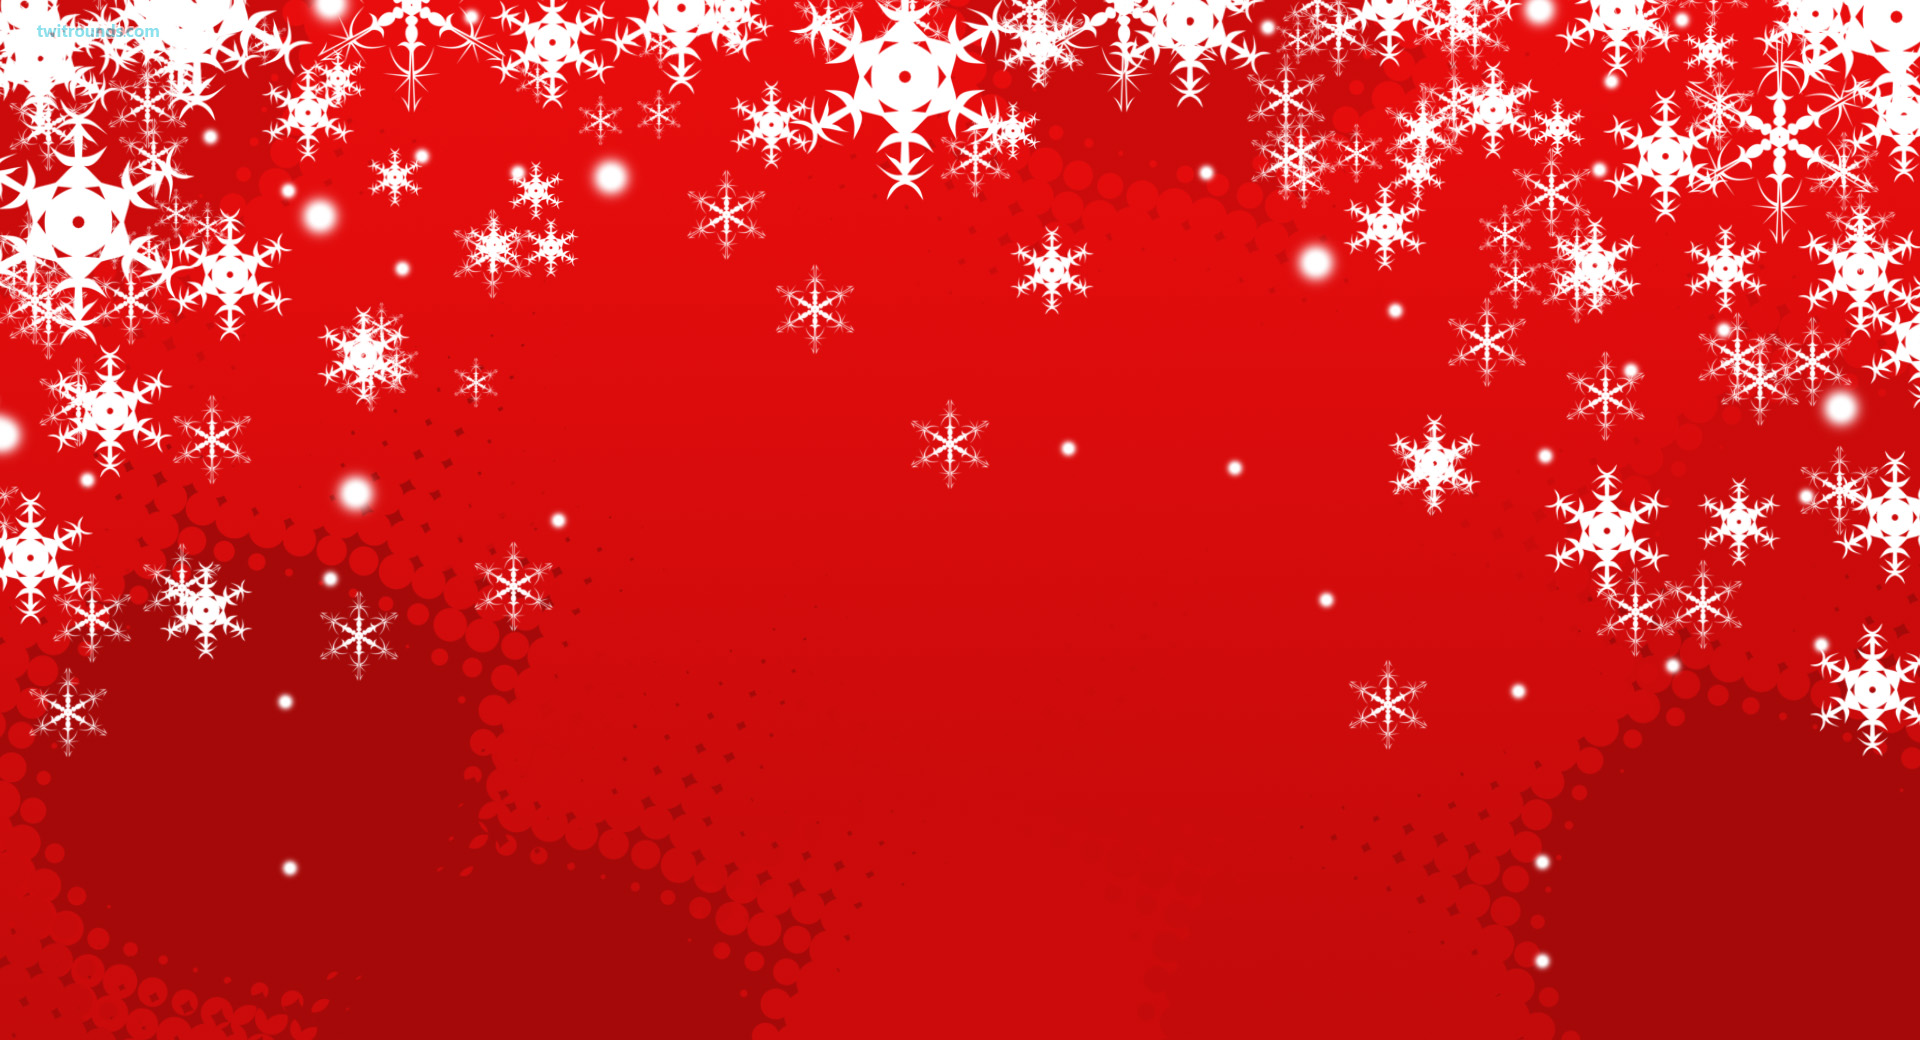 Best Collection of Christmas Wallpaper wallpapers - gethdpics.com